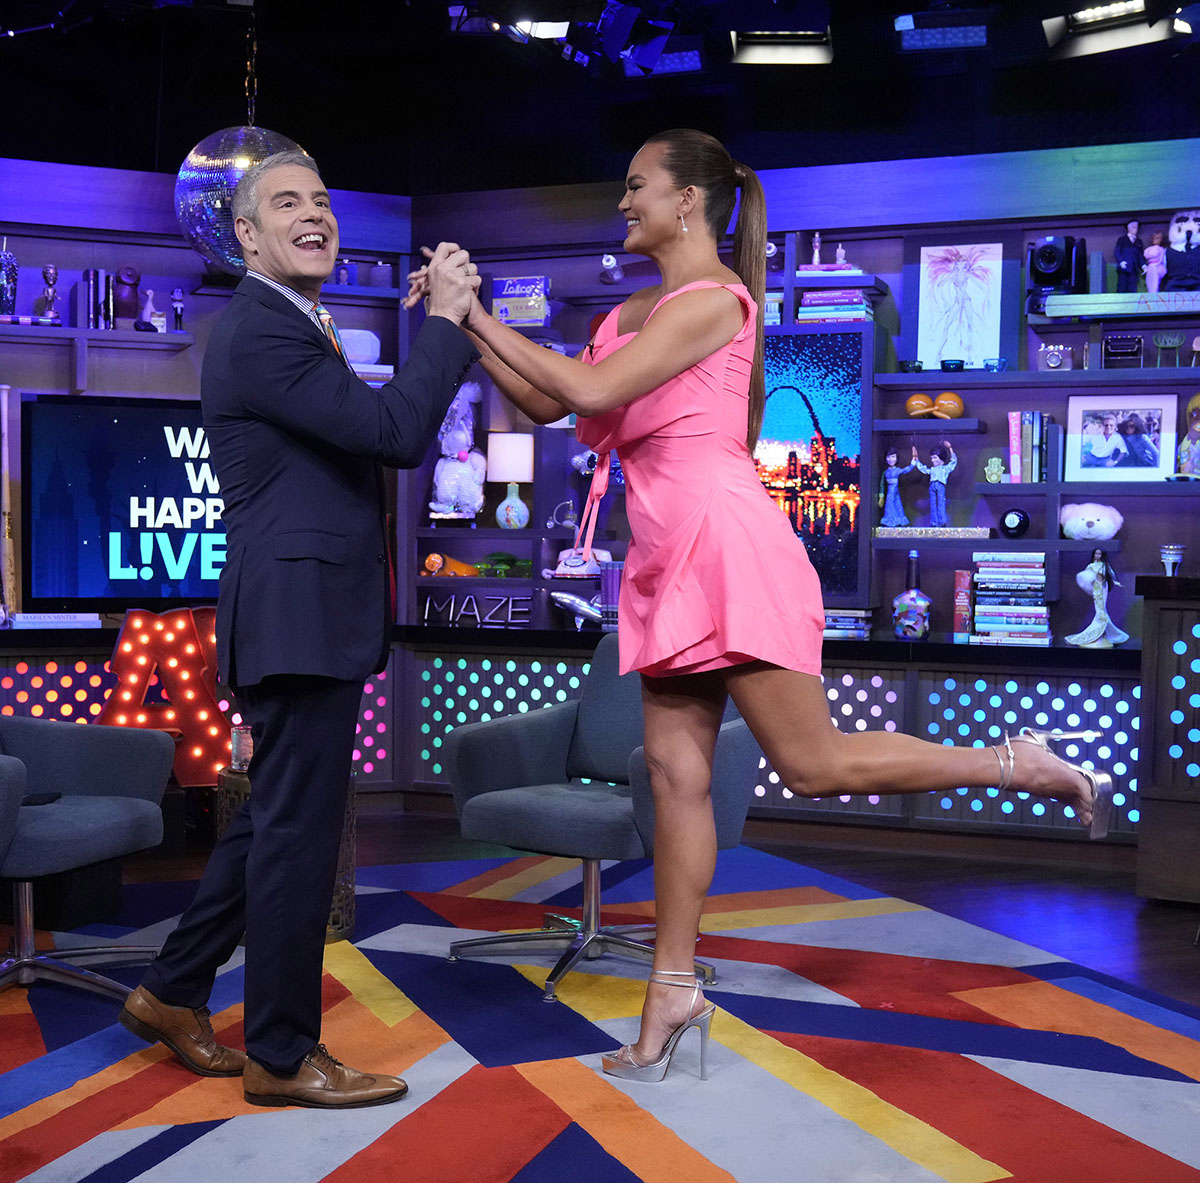 pink vivienne westwood dress, silver high heels, WATCH WHAT HAPPENS LIVE WITH ANDY COHEN -- Episode 20092 -- Pictured: Chrissy Teigen -- (Photo by: Charles Sykes/Bravo via Getty Images), andy cohen